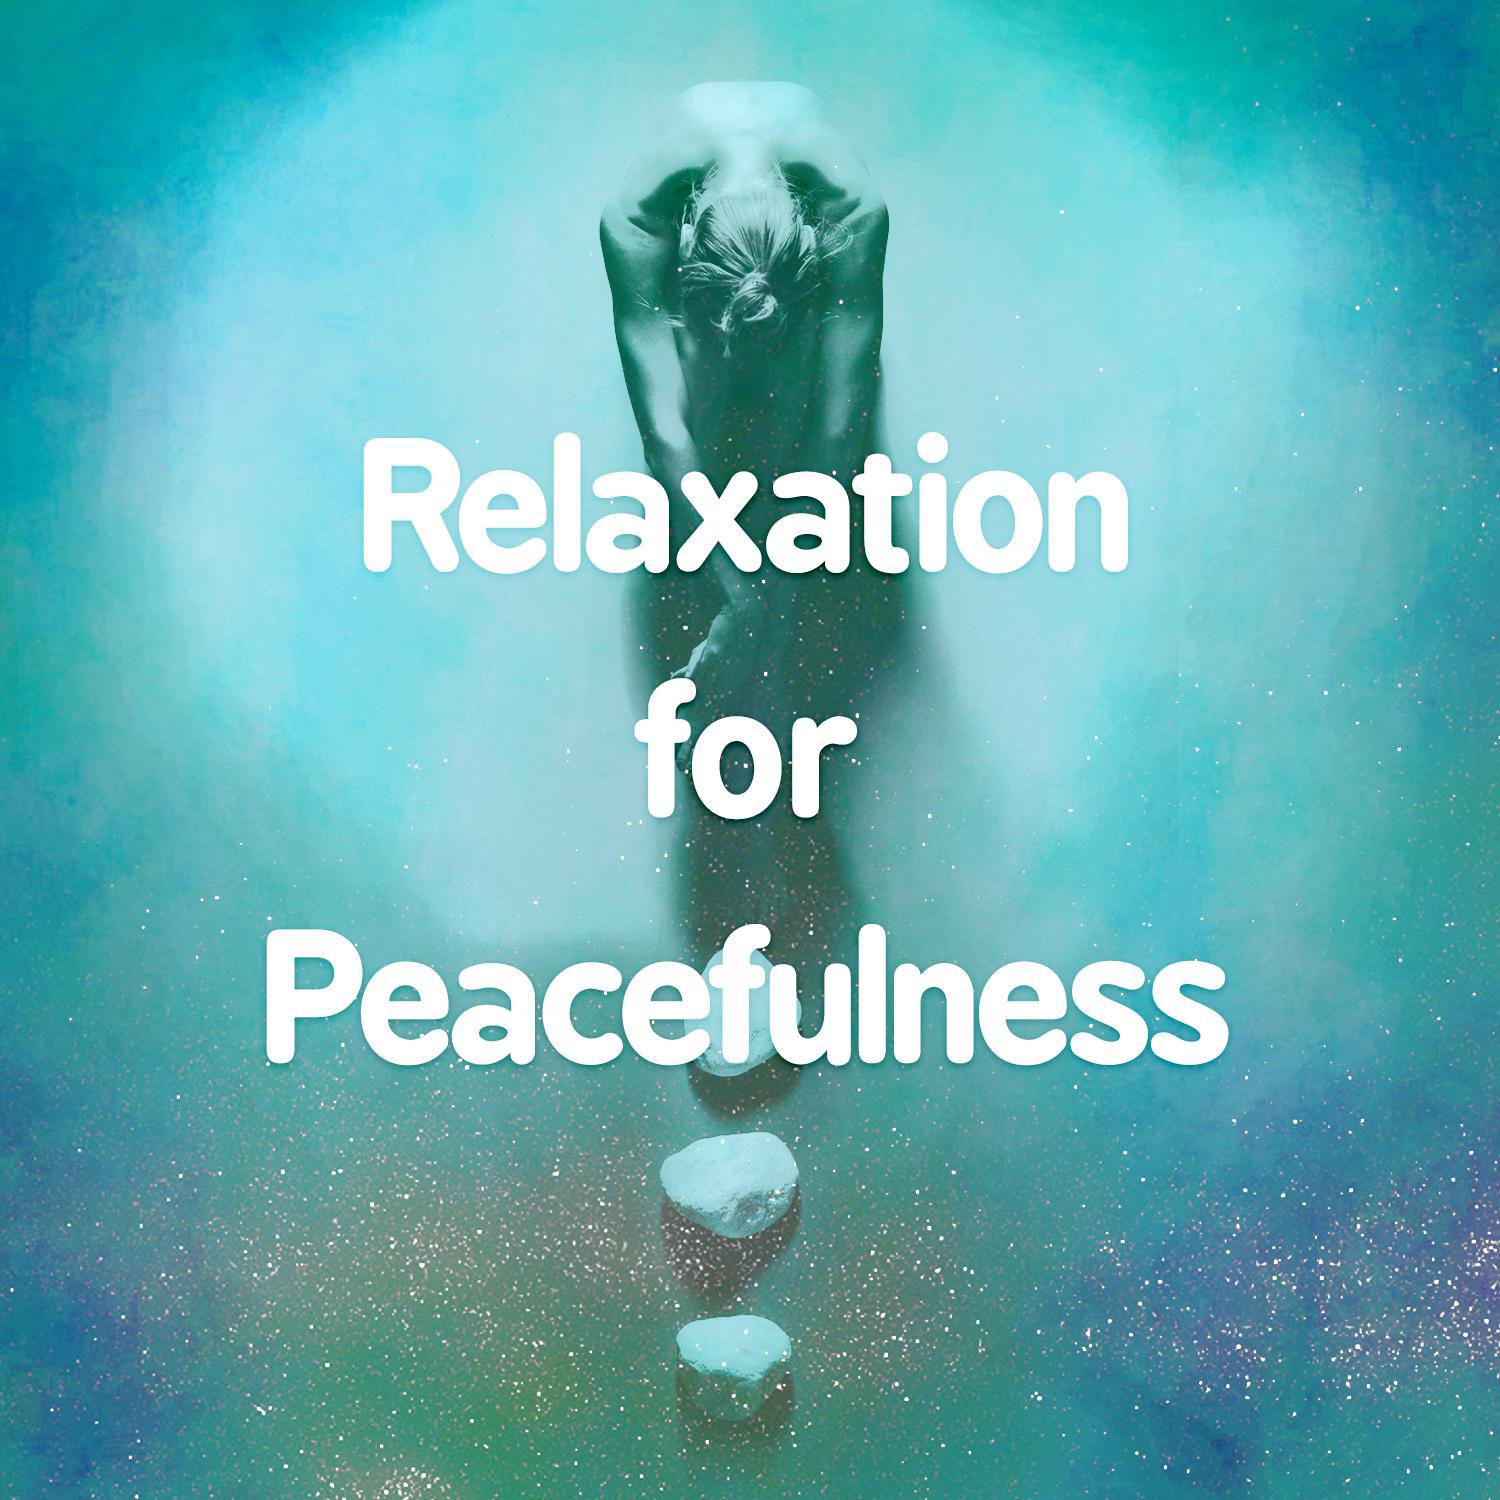 Relaxation for Peacefulness